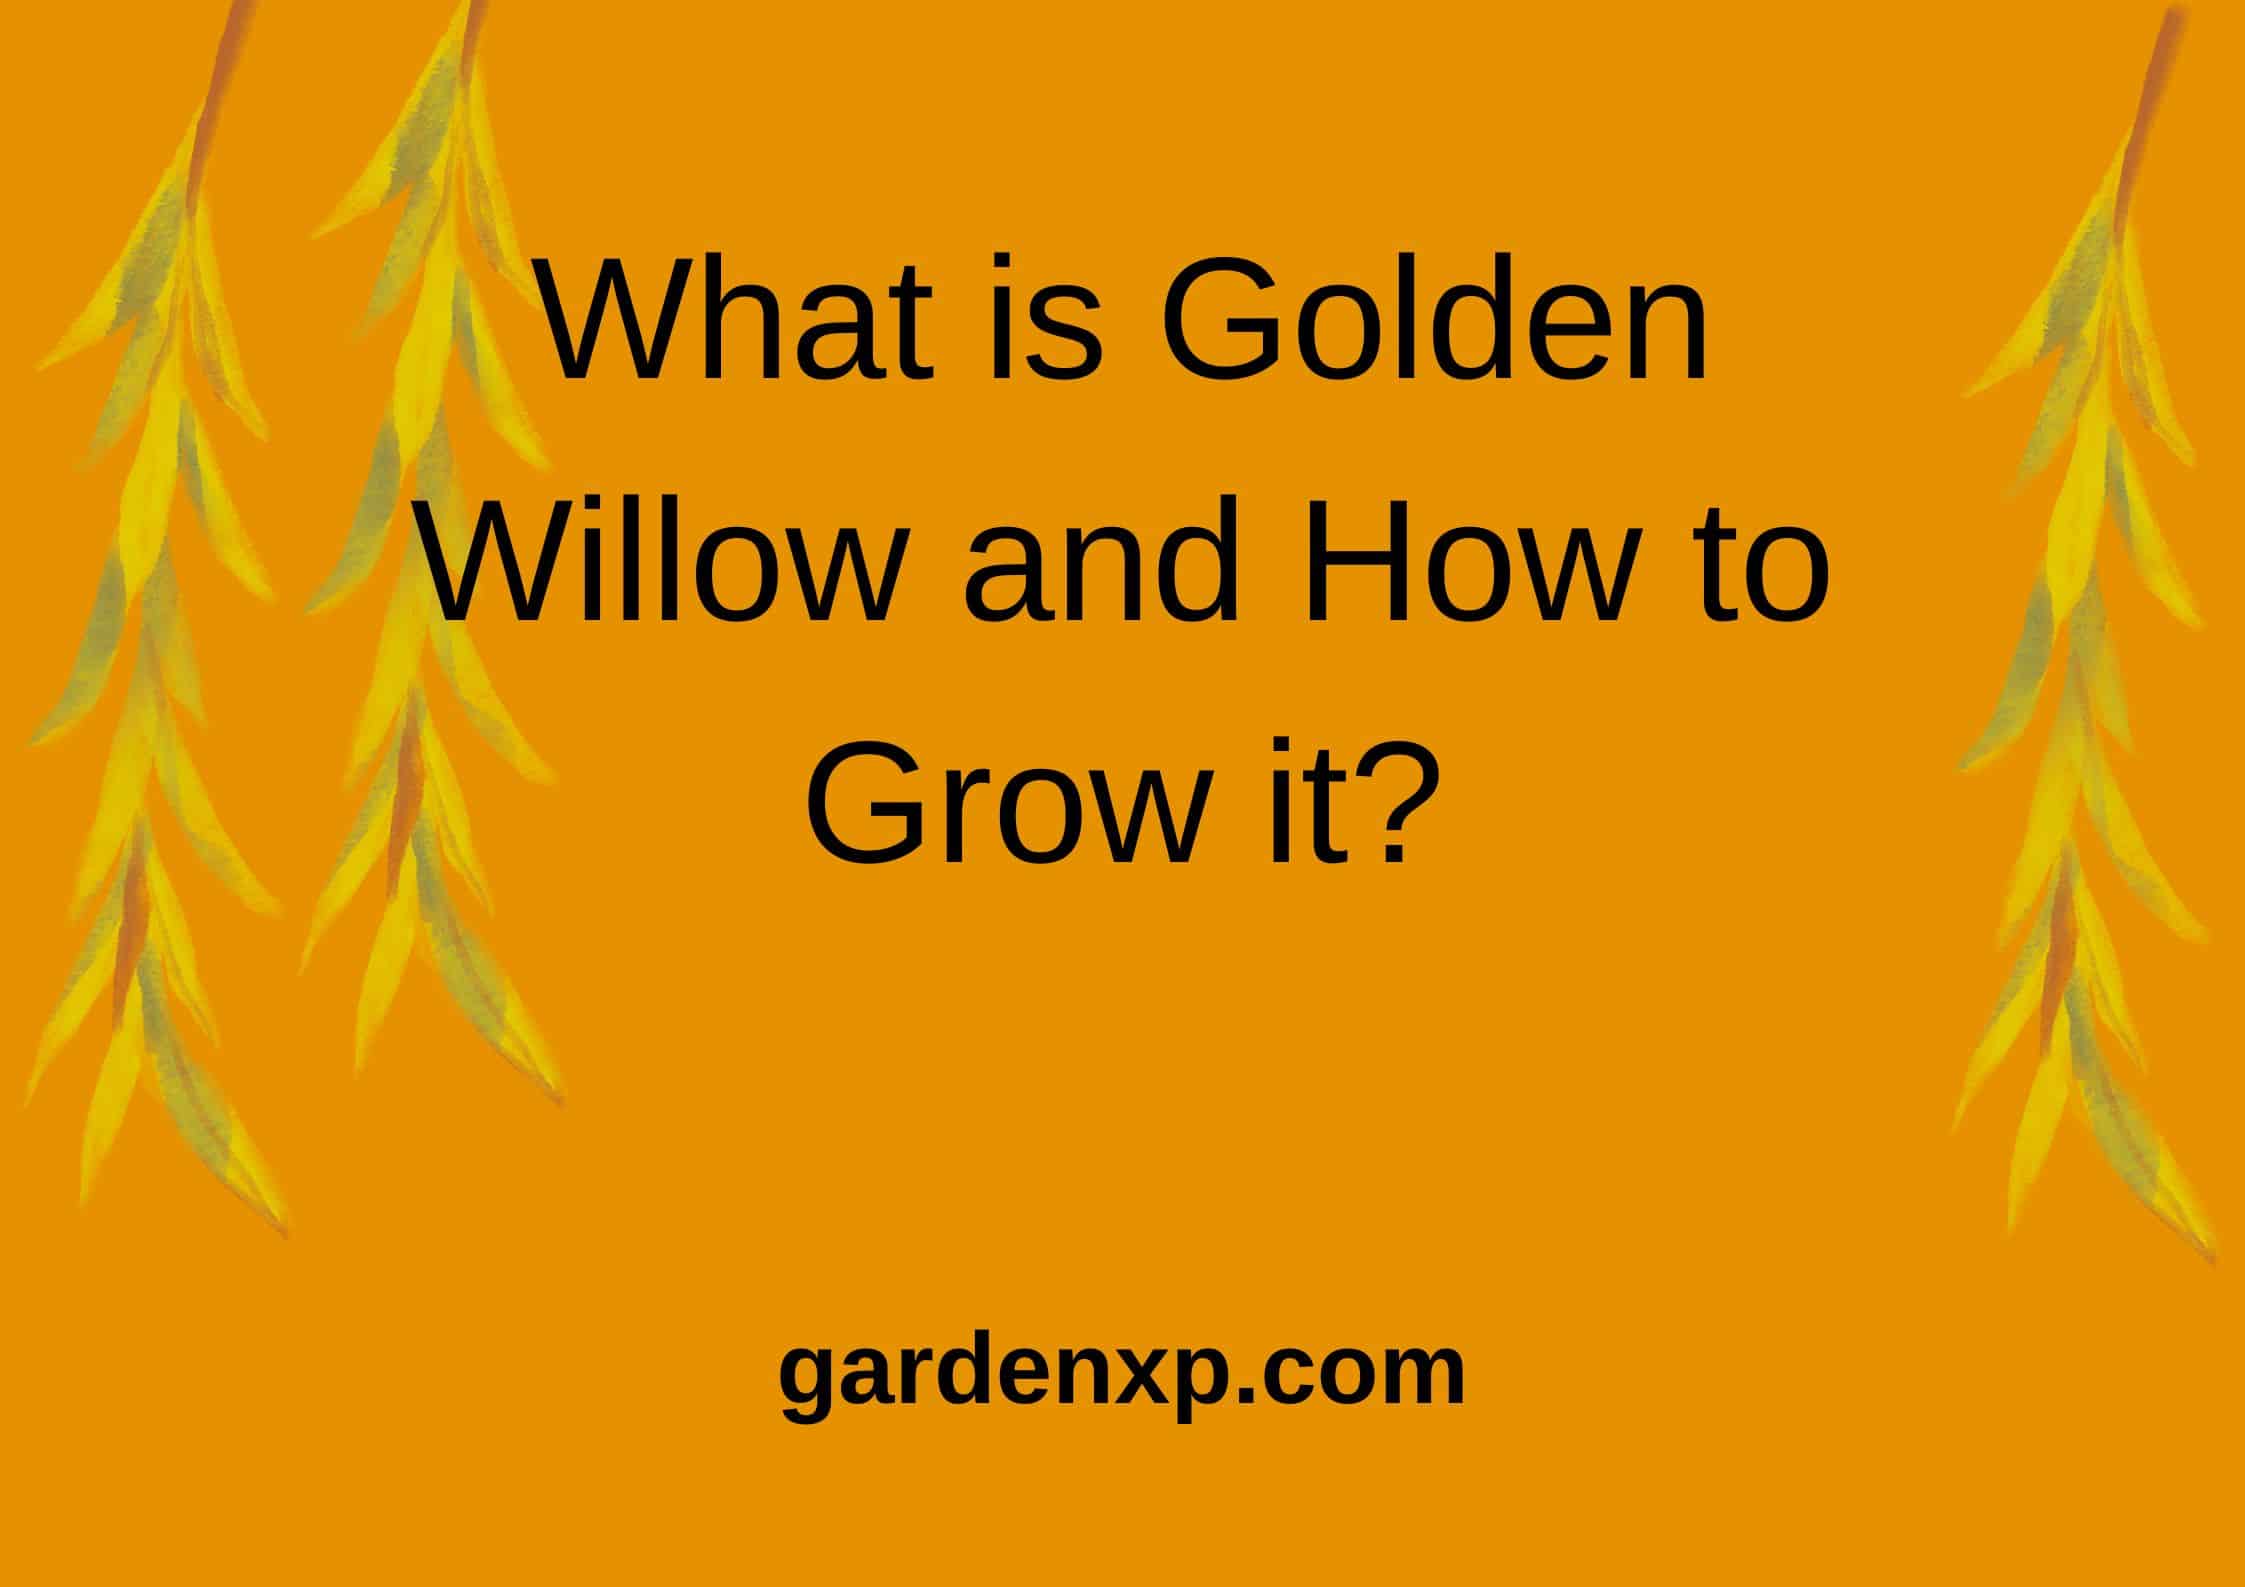 What is Golden Willow and How to Grow it?